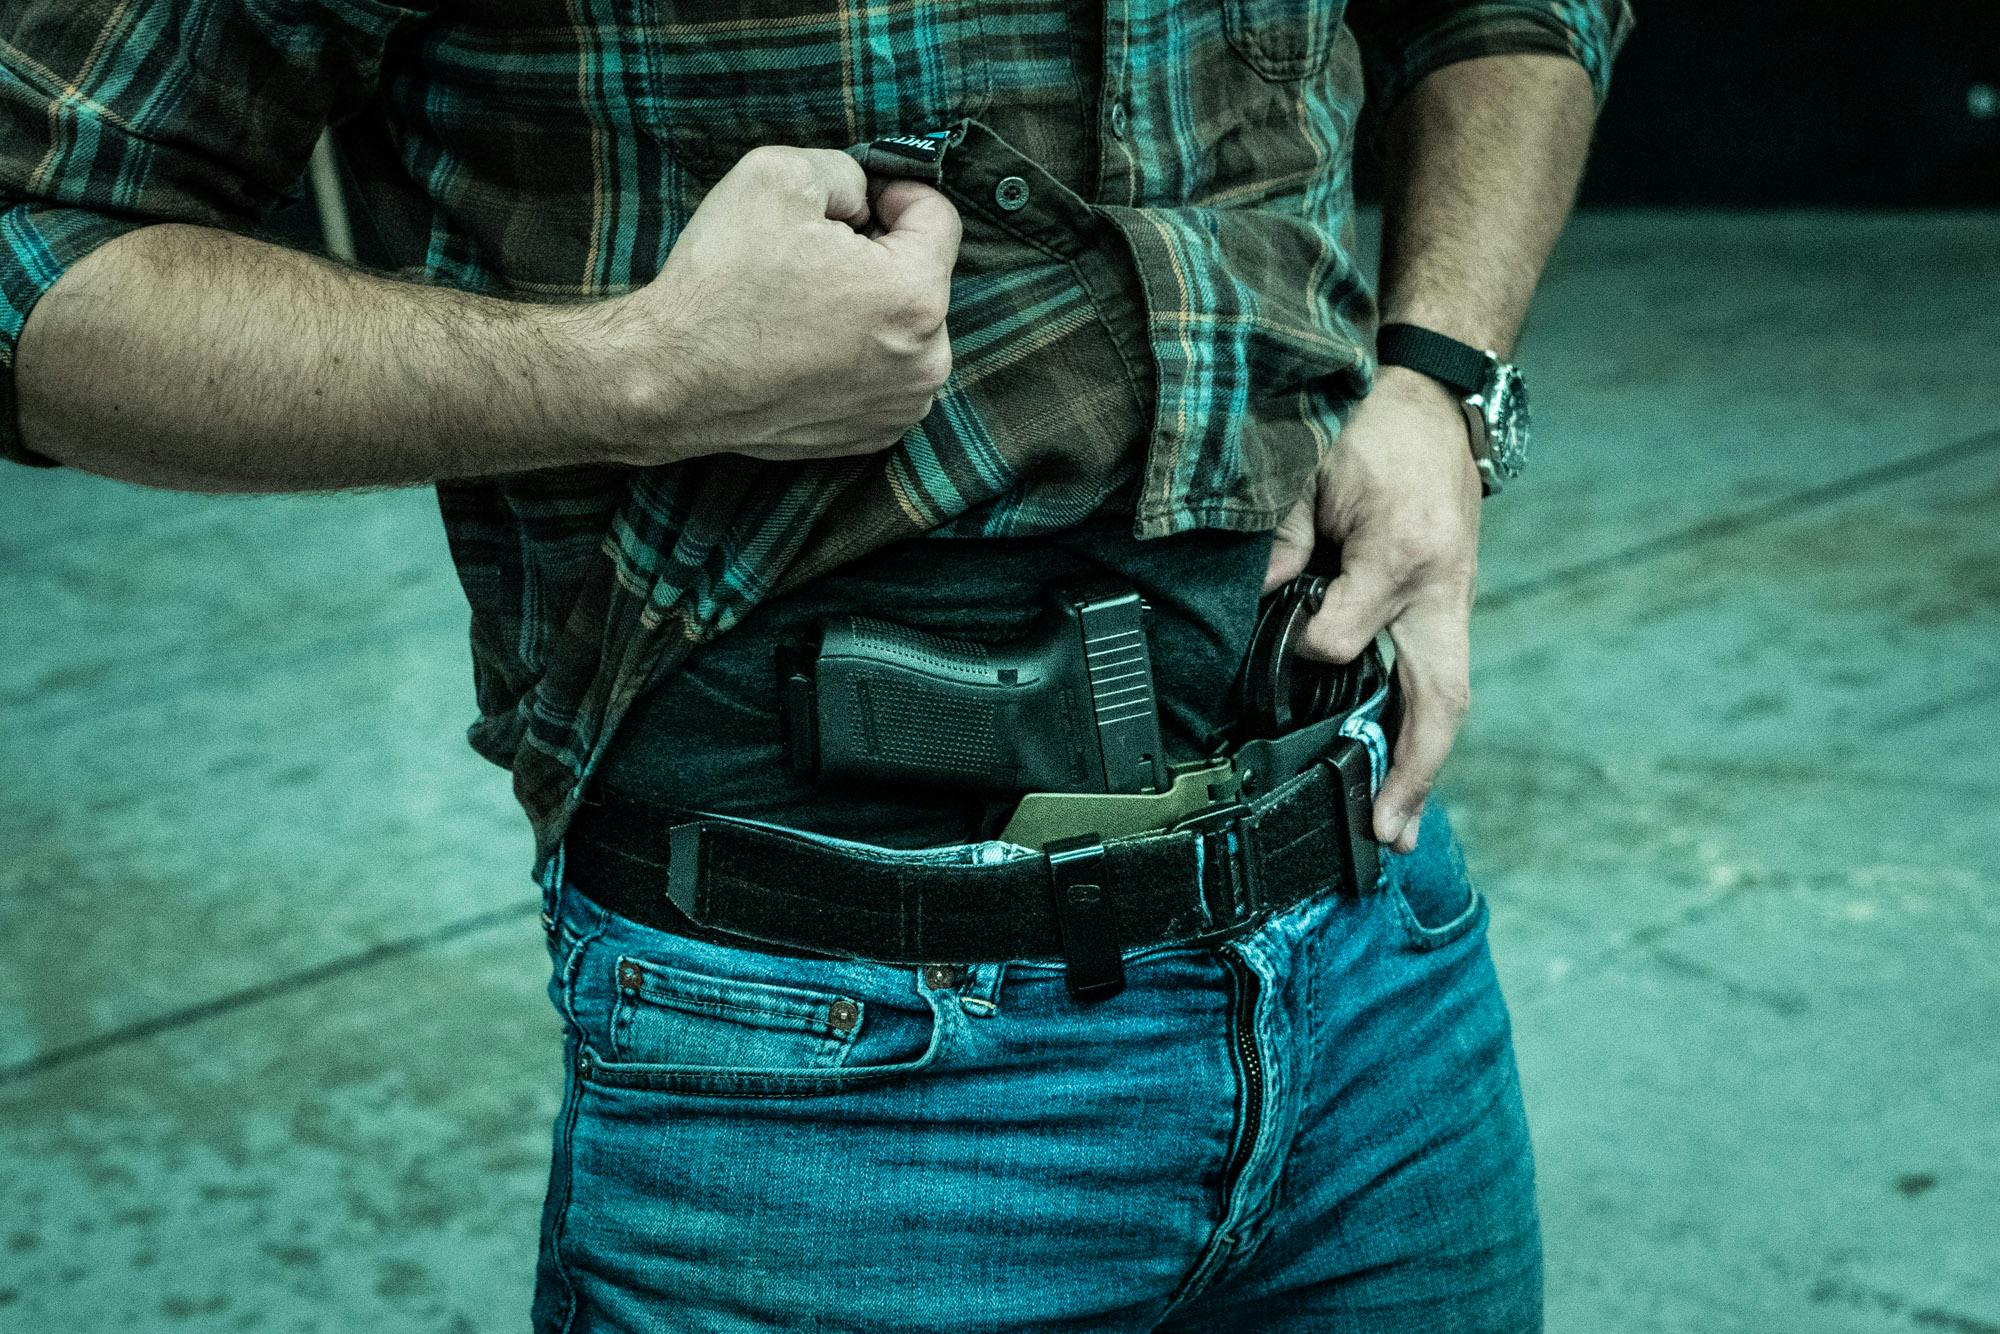 IWB Concealed Handcuff Carrier